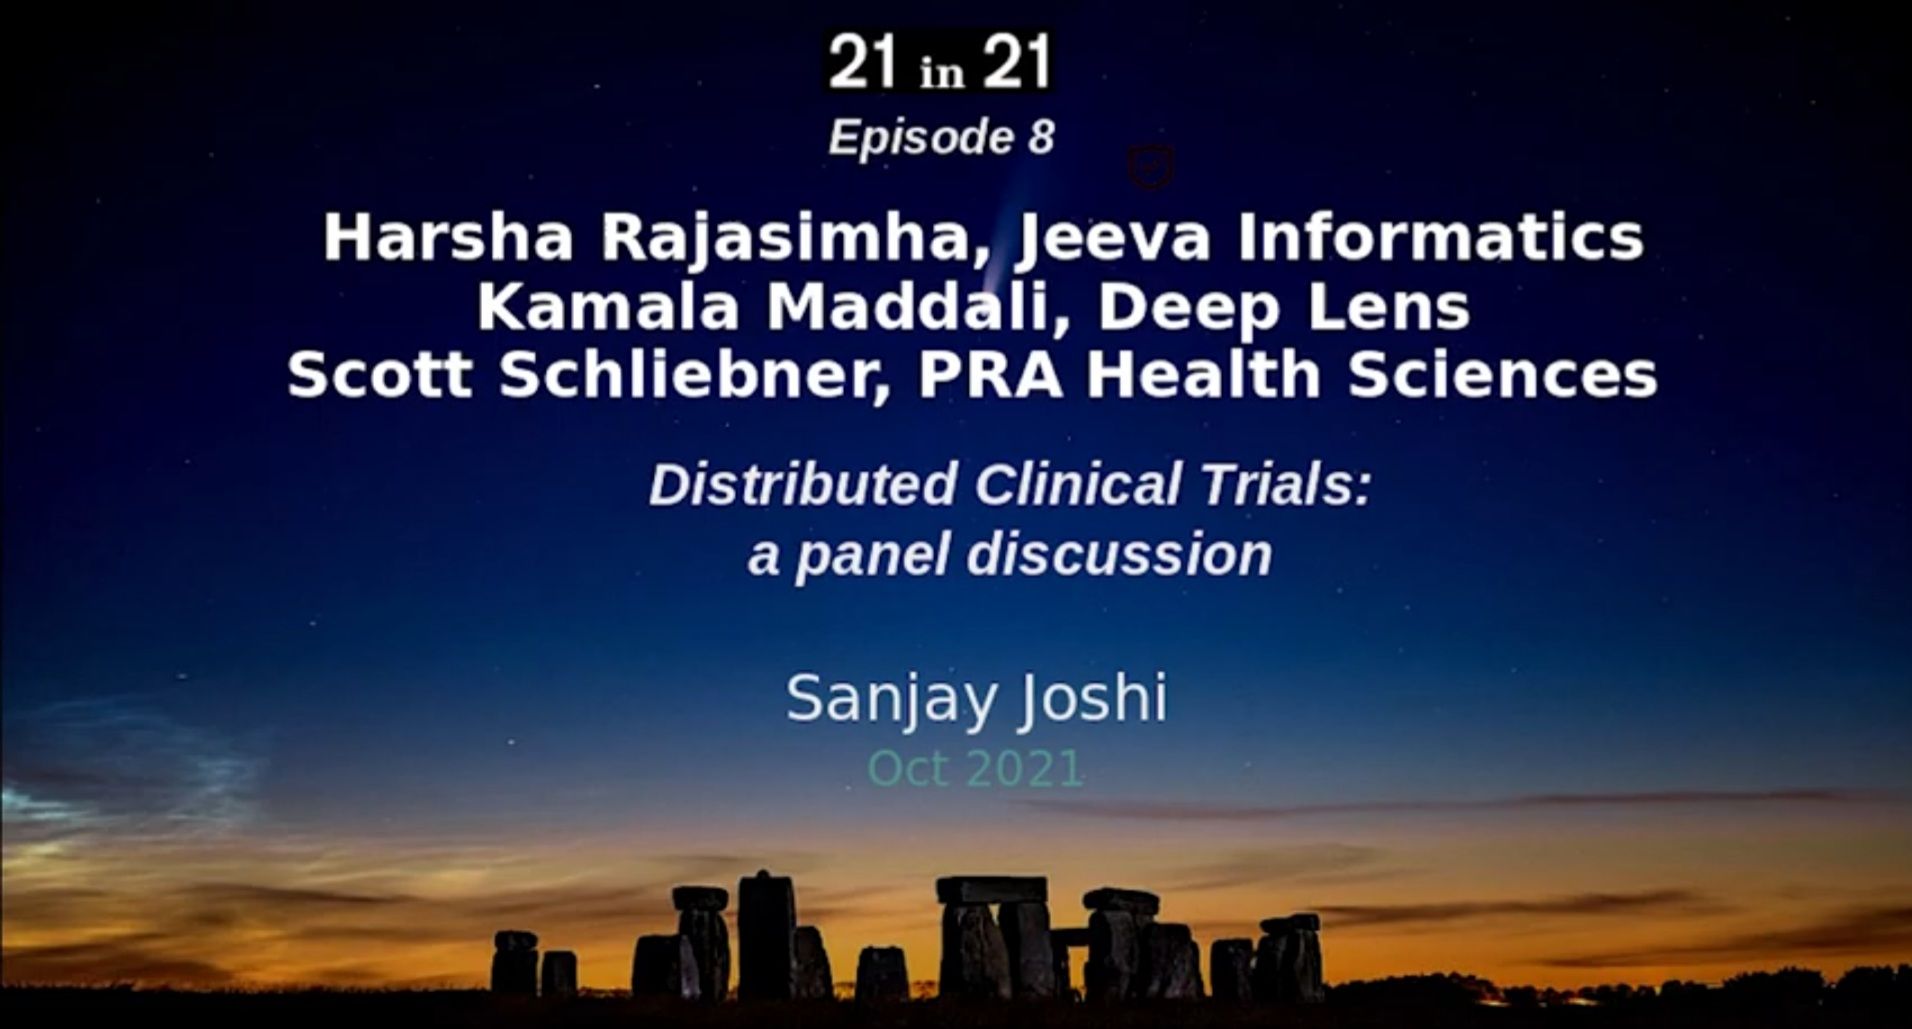 Harsha Rajasimha Joined Kamala Maddali And Scott Schliebner For an Exciting Discussion On Distributed Clinical Trials